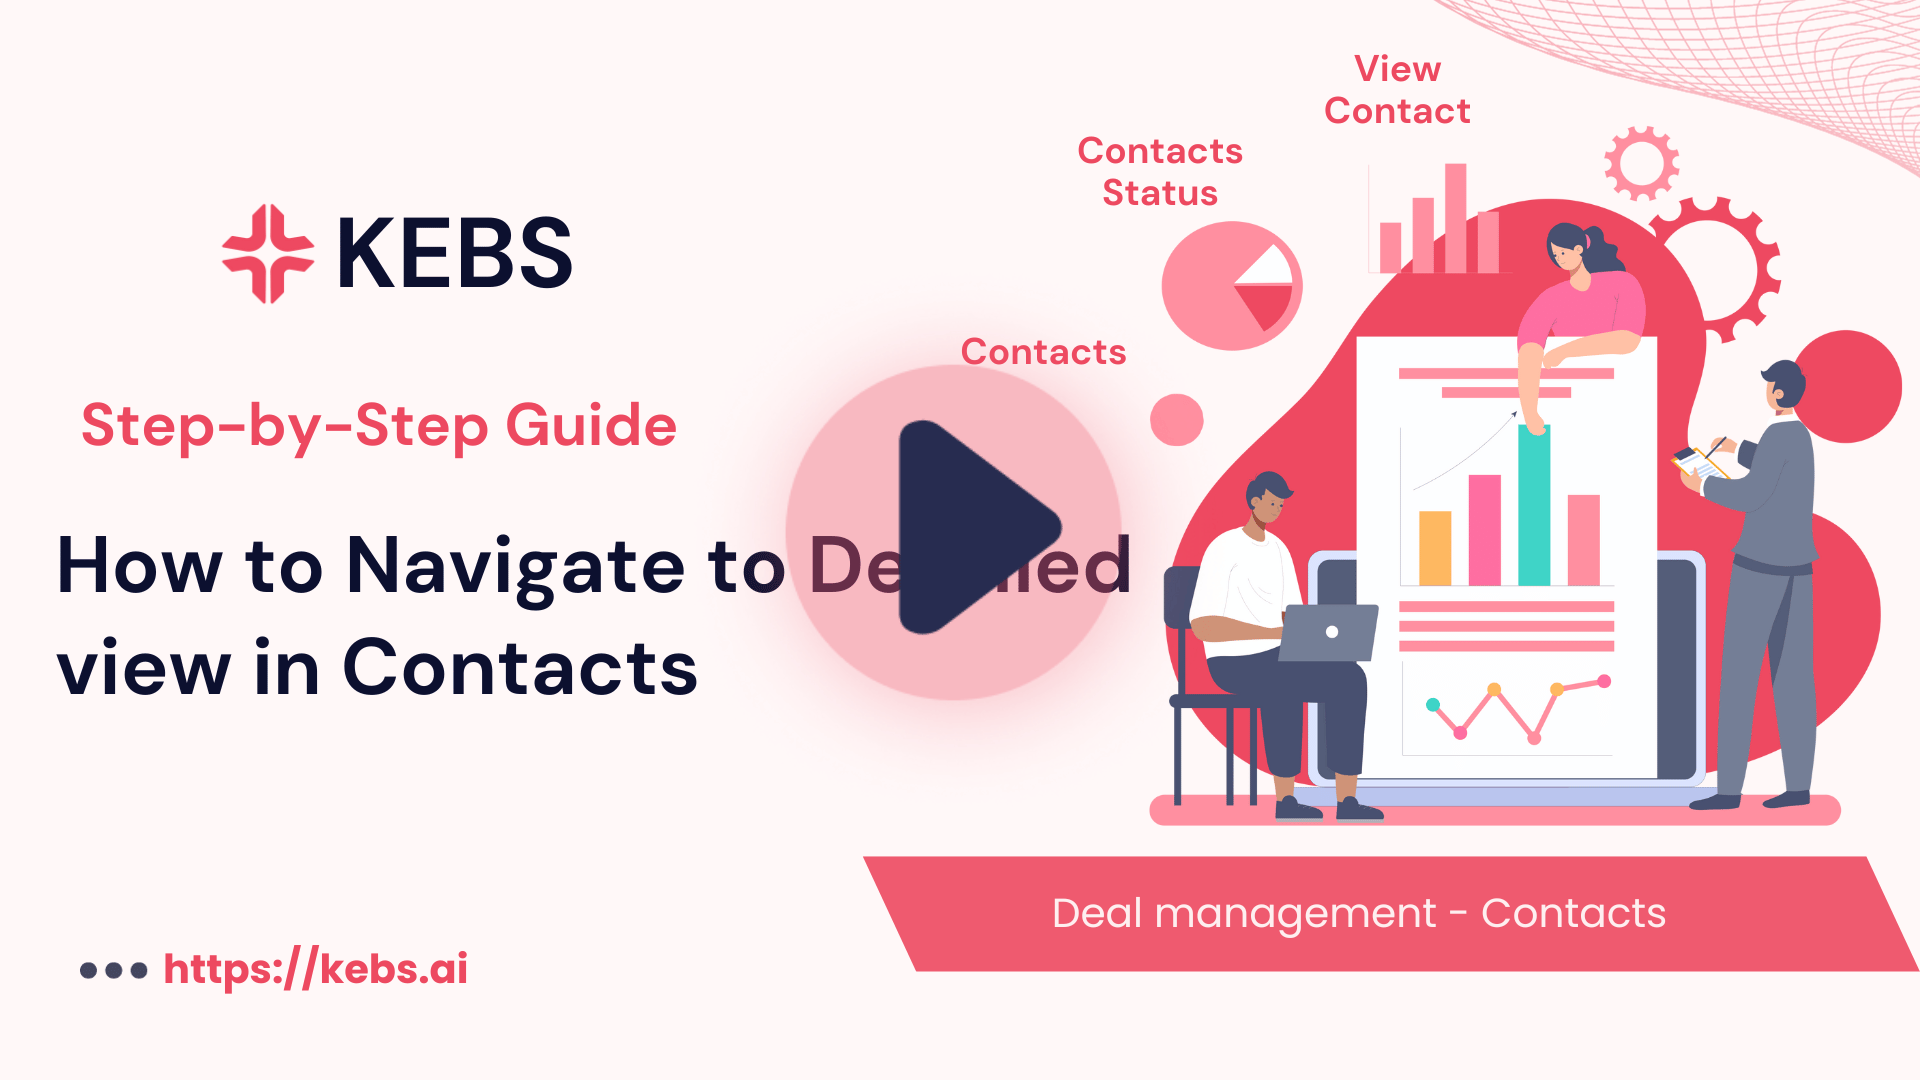 How to Navigate to Detailed view in Contacts